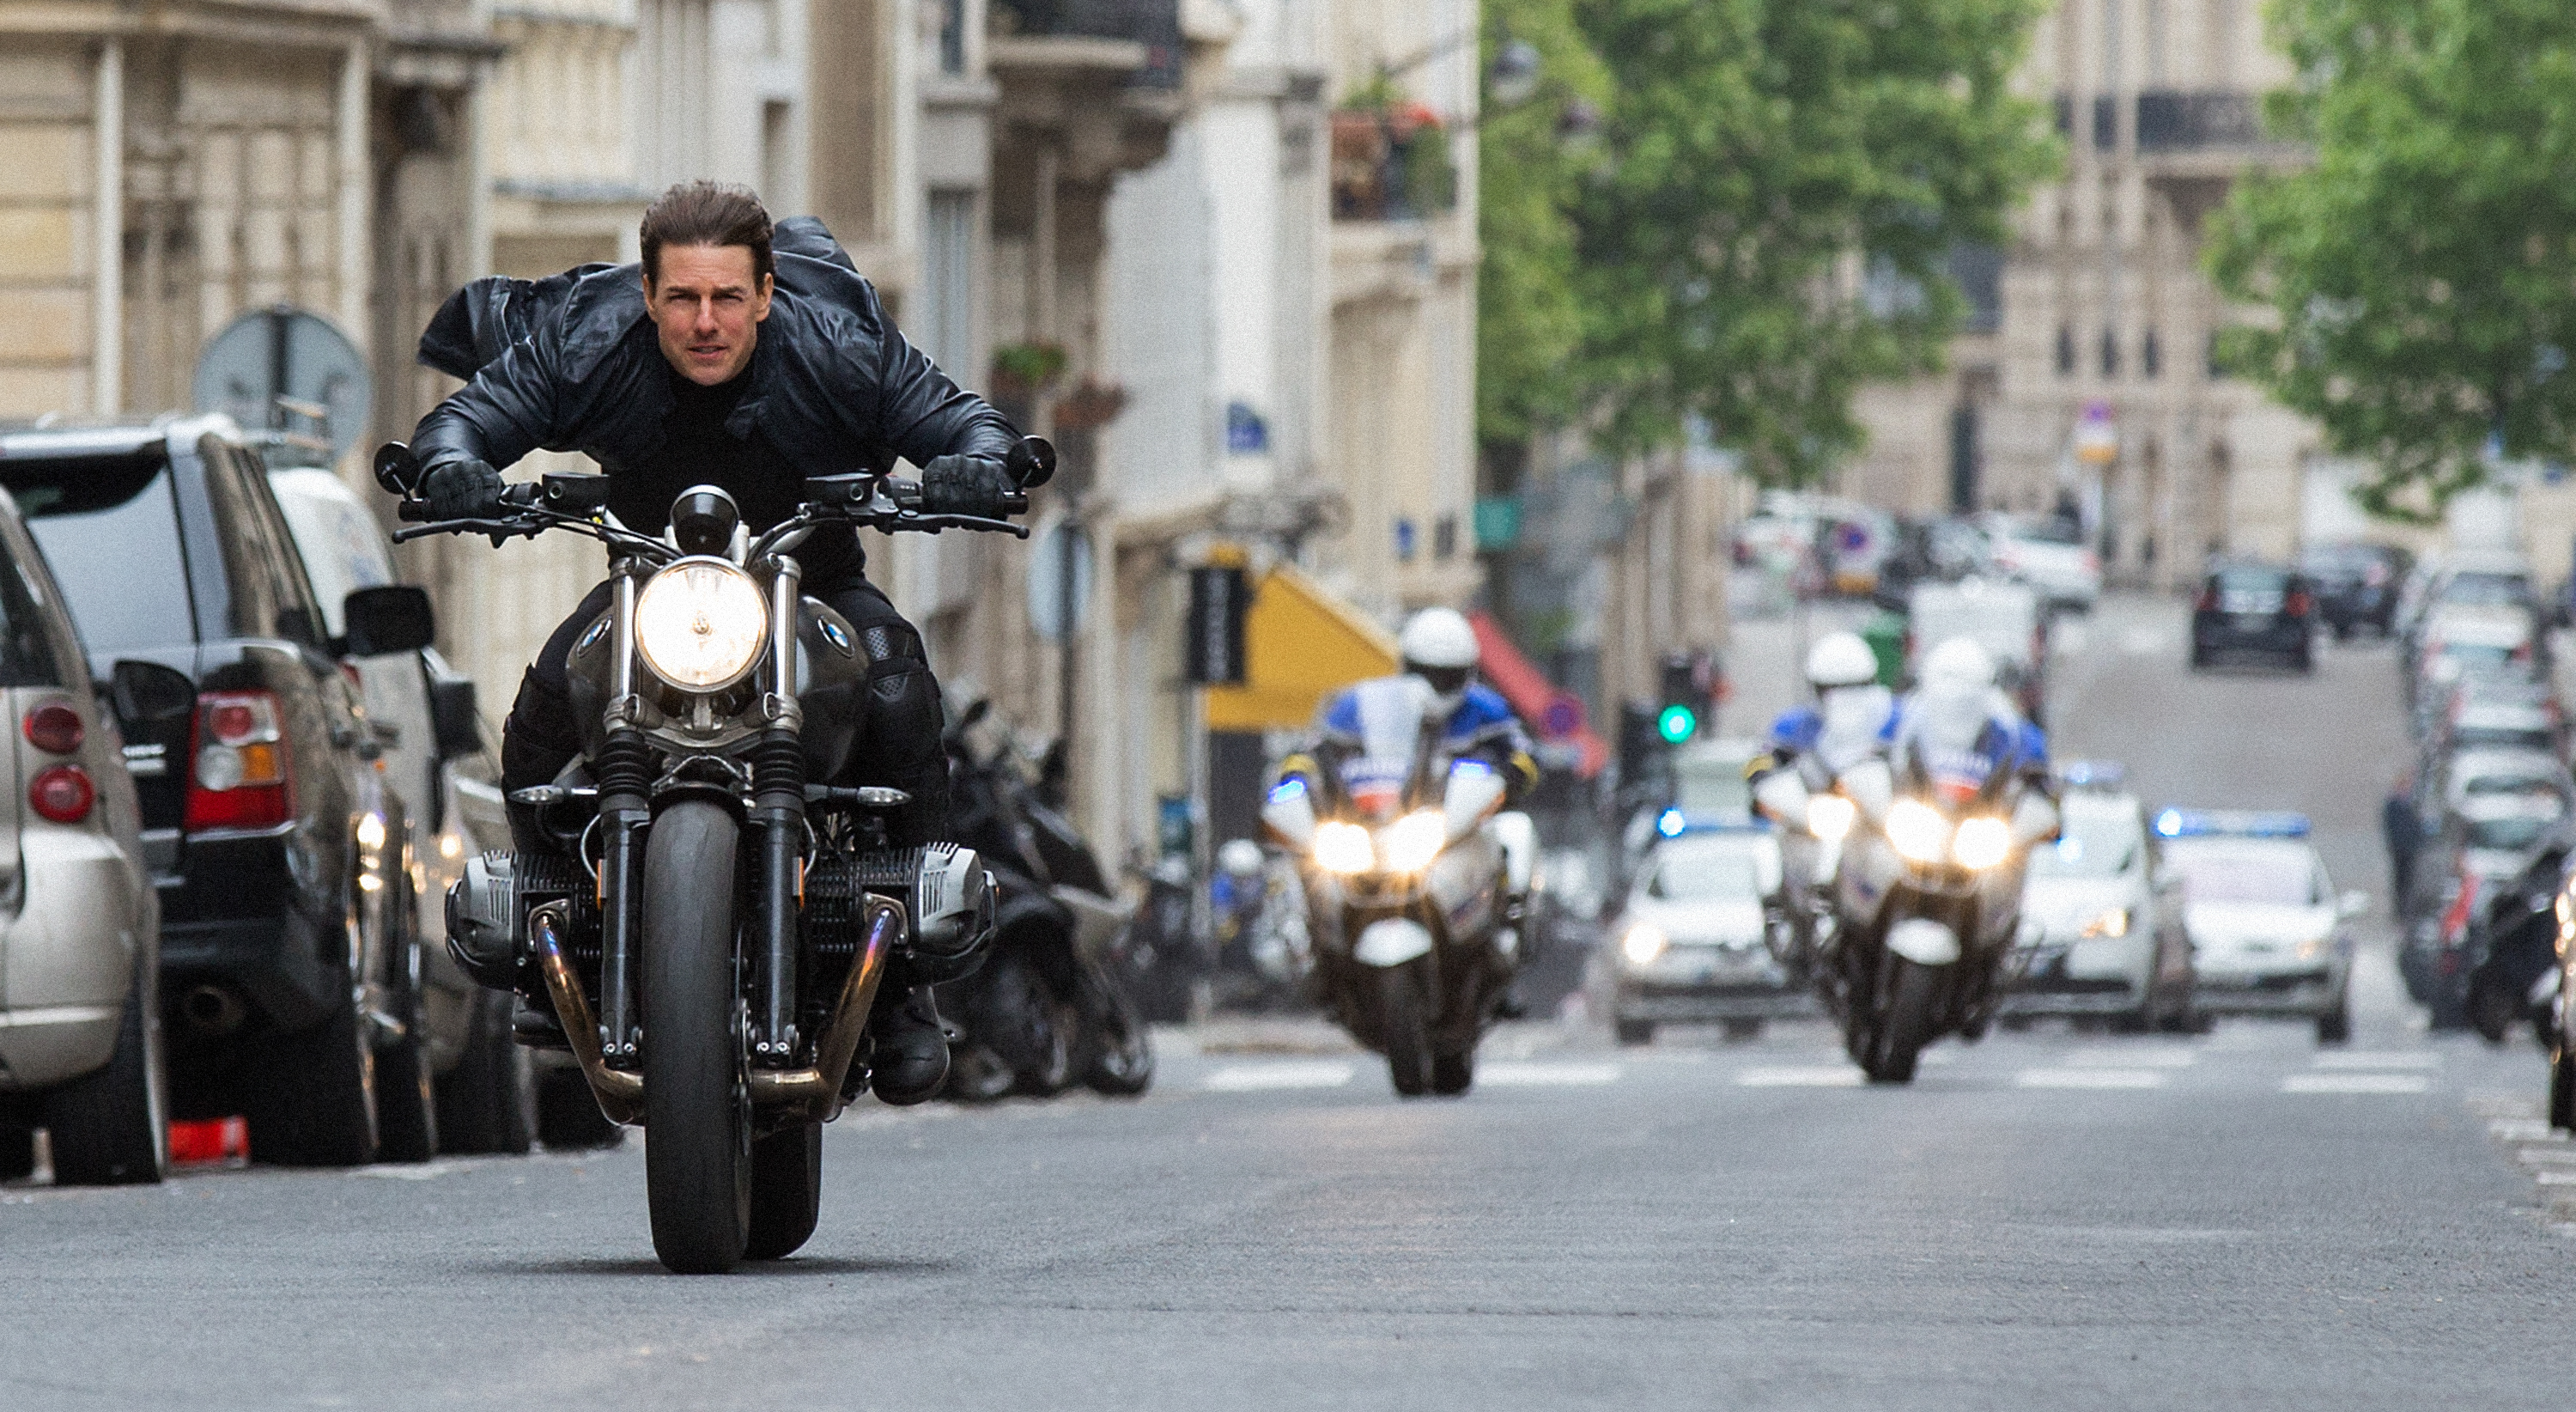 Movie Mission: Impossible - Fallout HD Wallpaper | Background Image